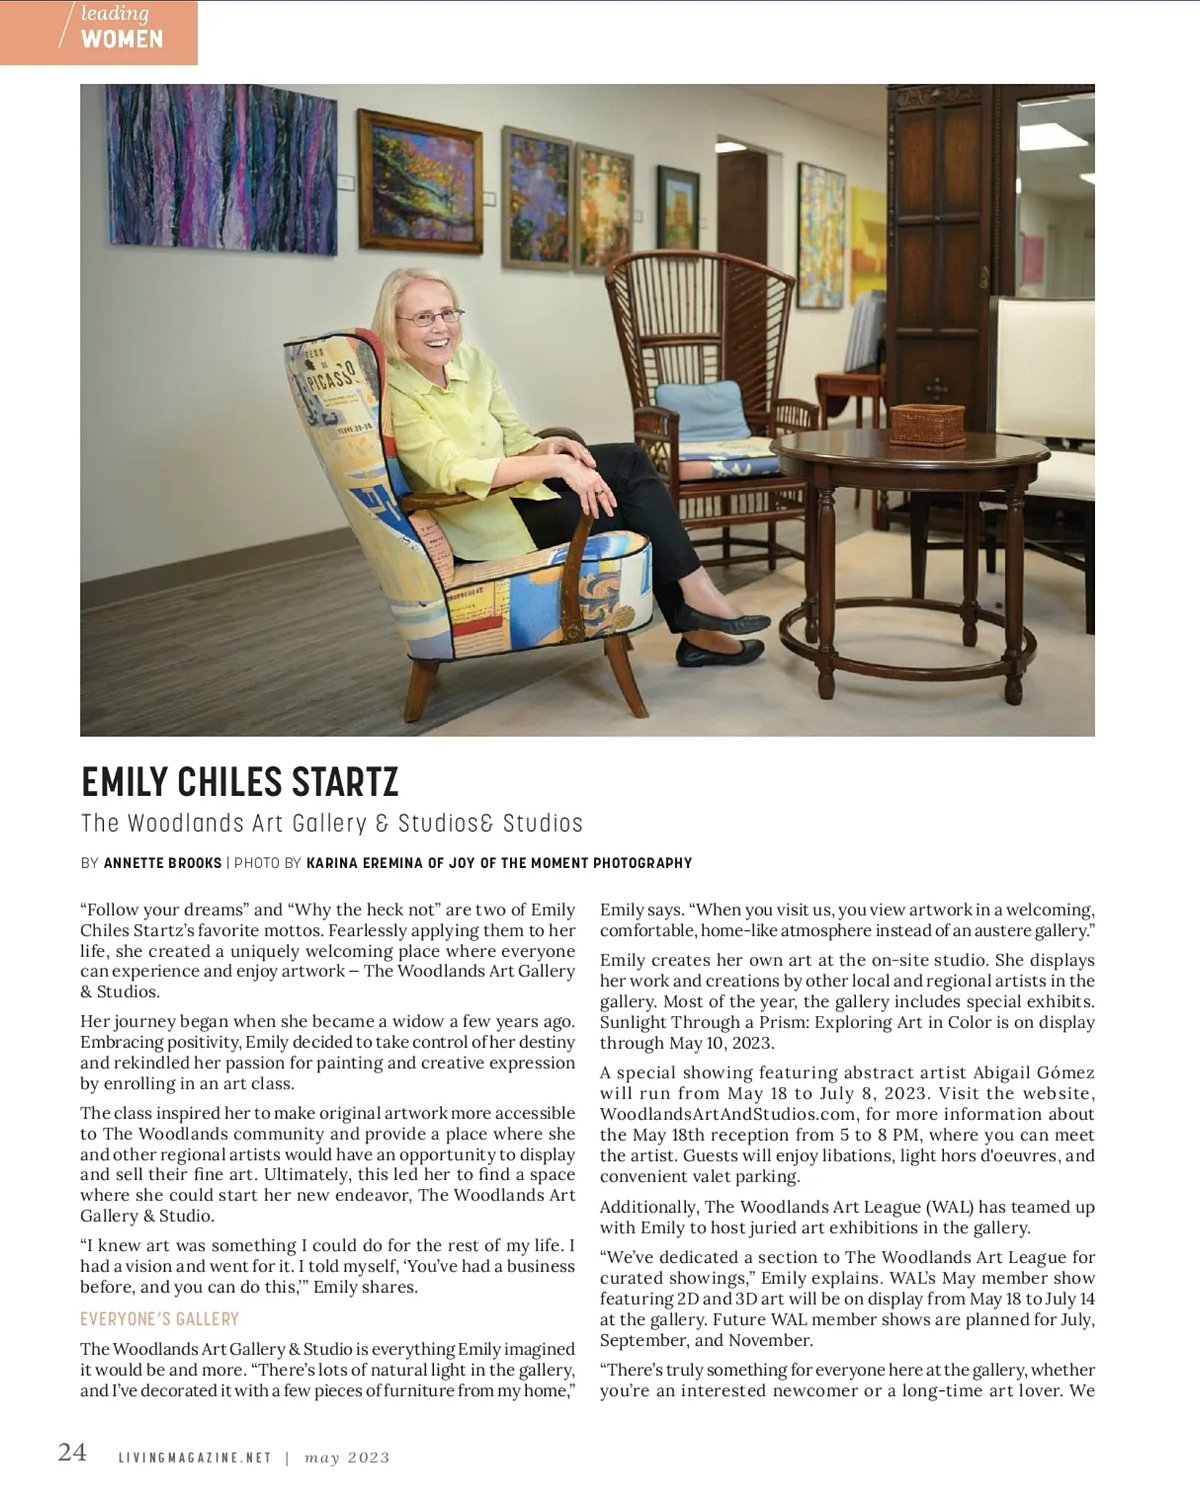  THE WOODLANDS, TEXAS - MAY 1ST 2023: Emily Chiles Startz, the owner and the artist in residence at The Woodlands Art Gallery & Studios, is featured in Living Magazine with work from regional artists. 